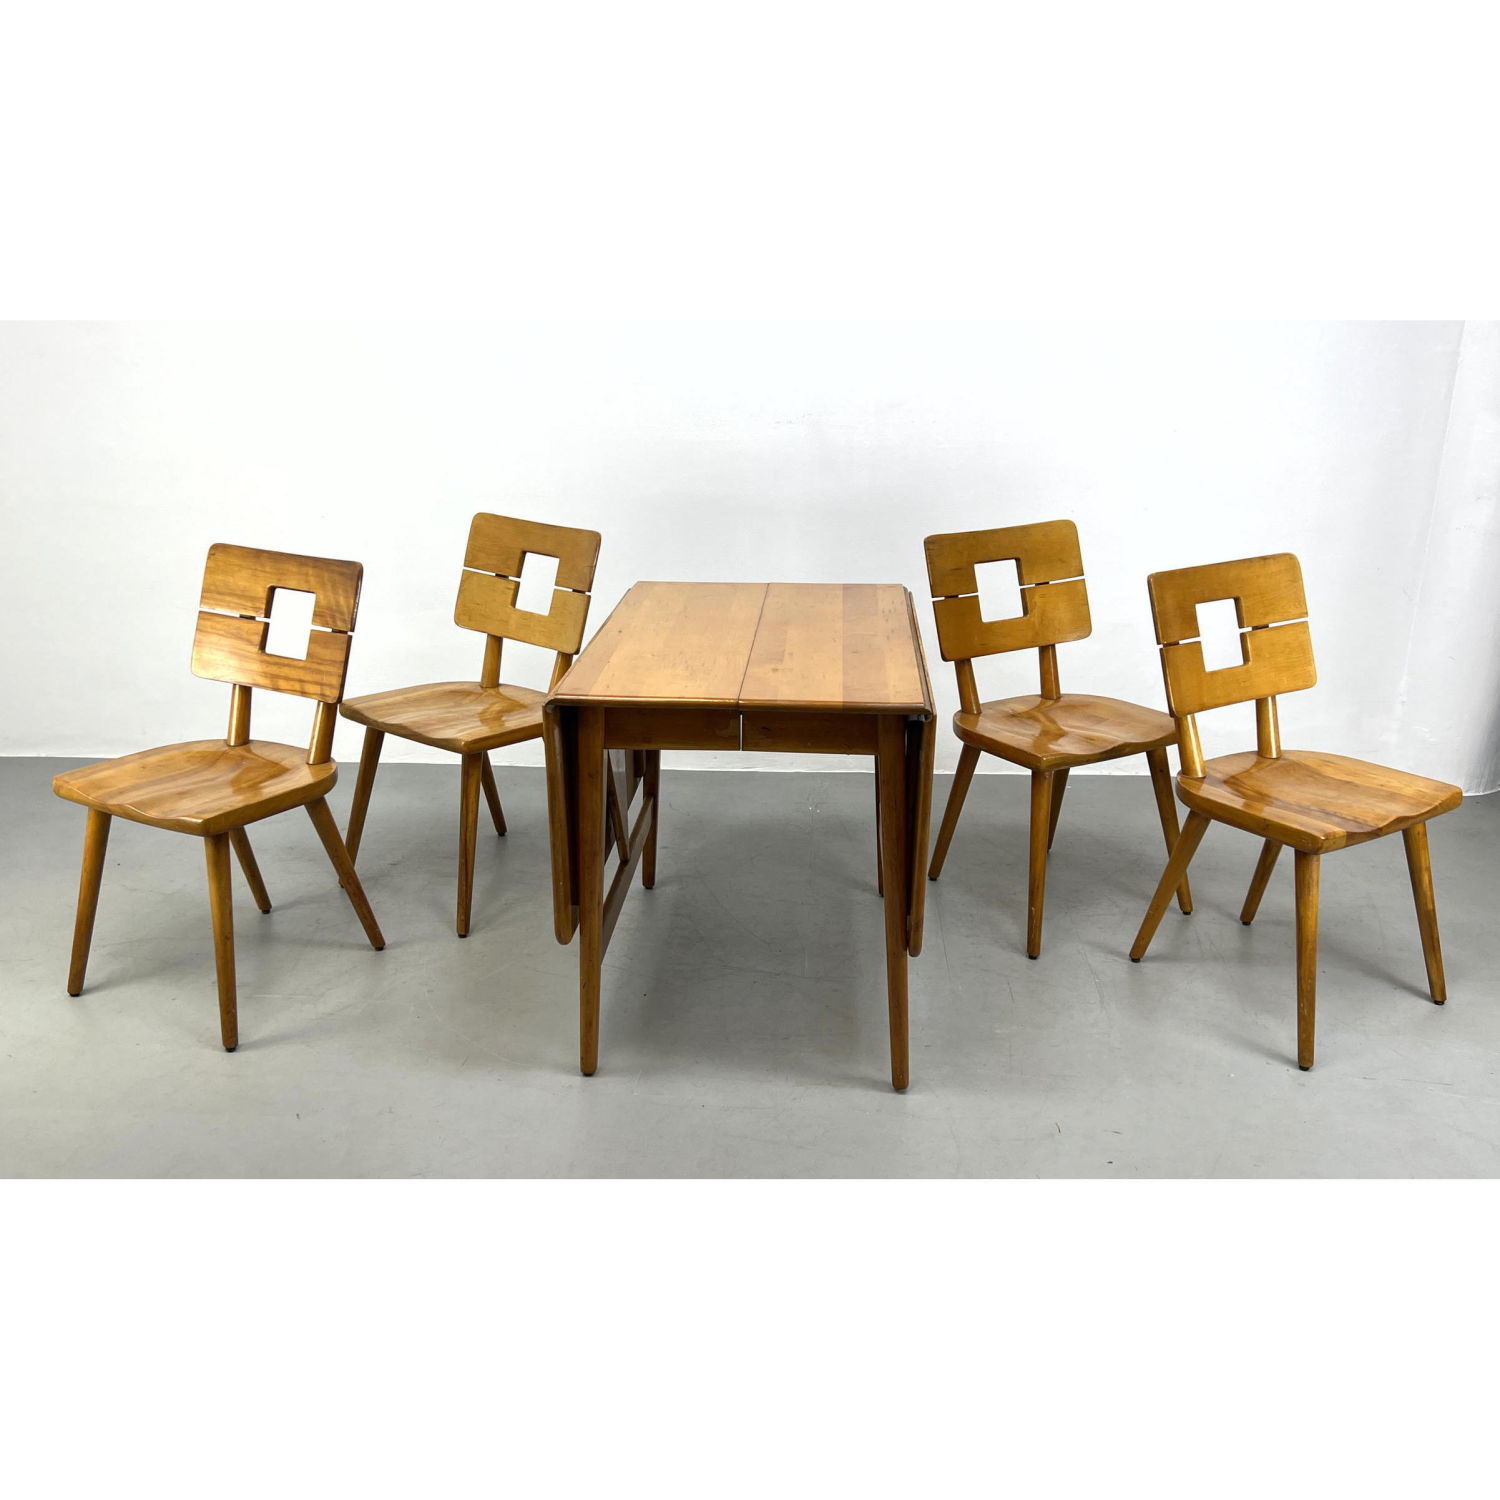 Rustic Maple Dining Set with 4